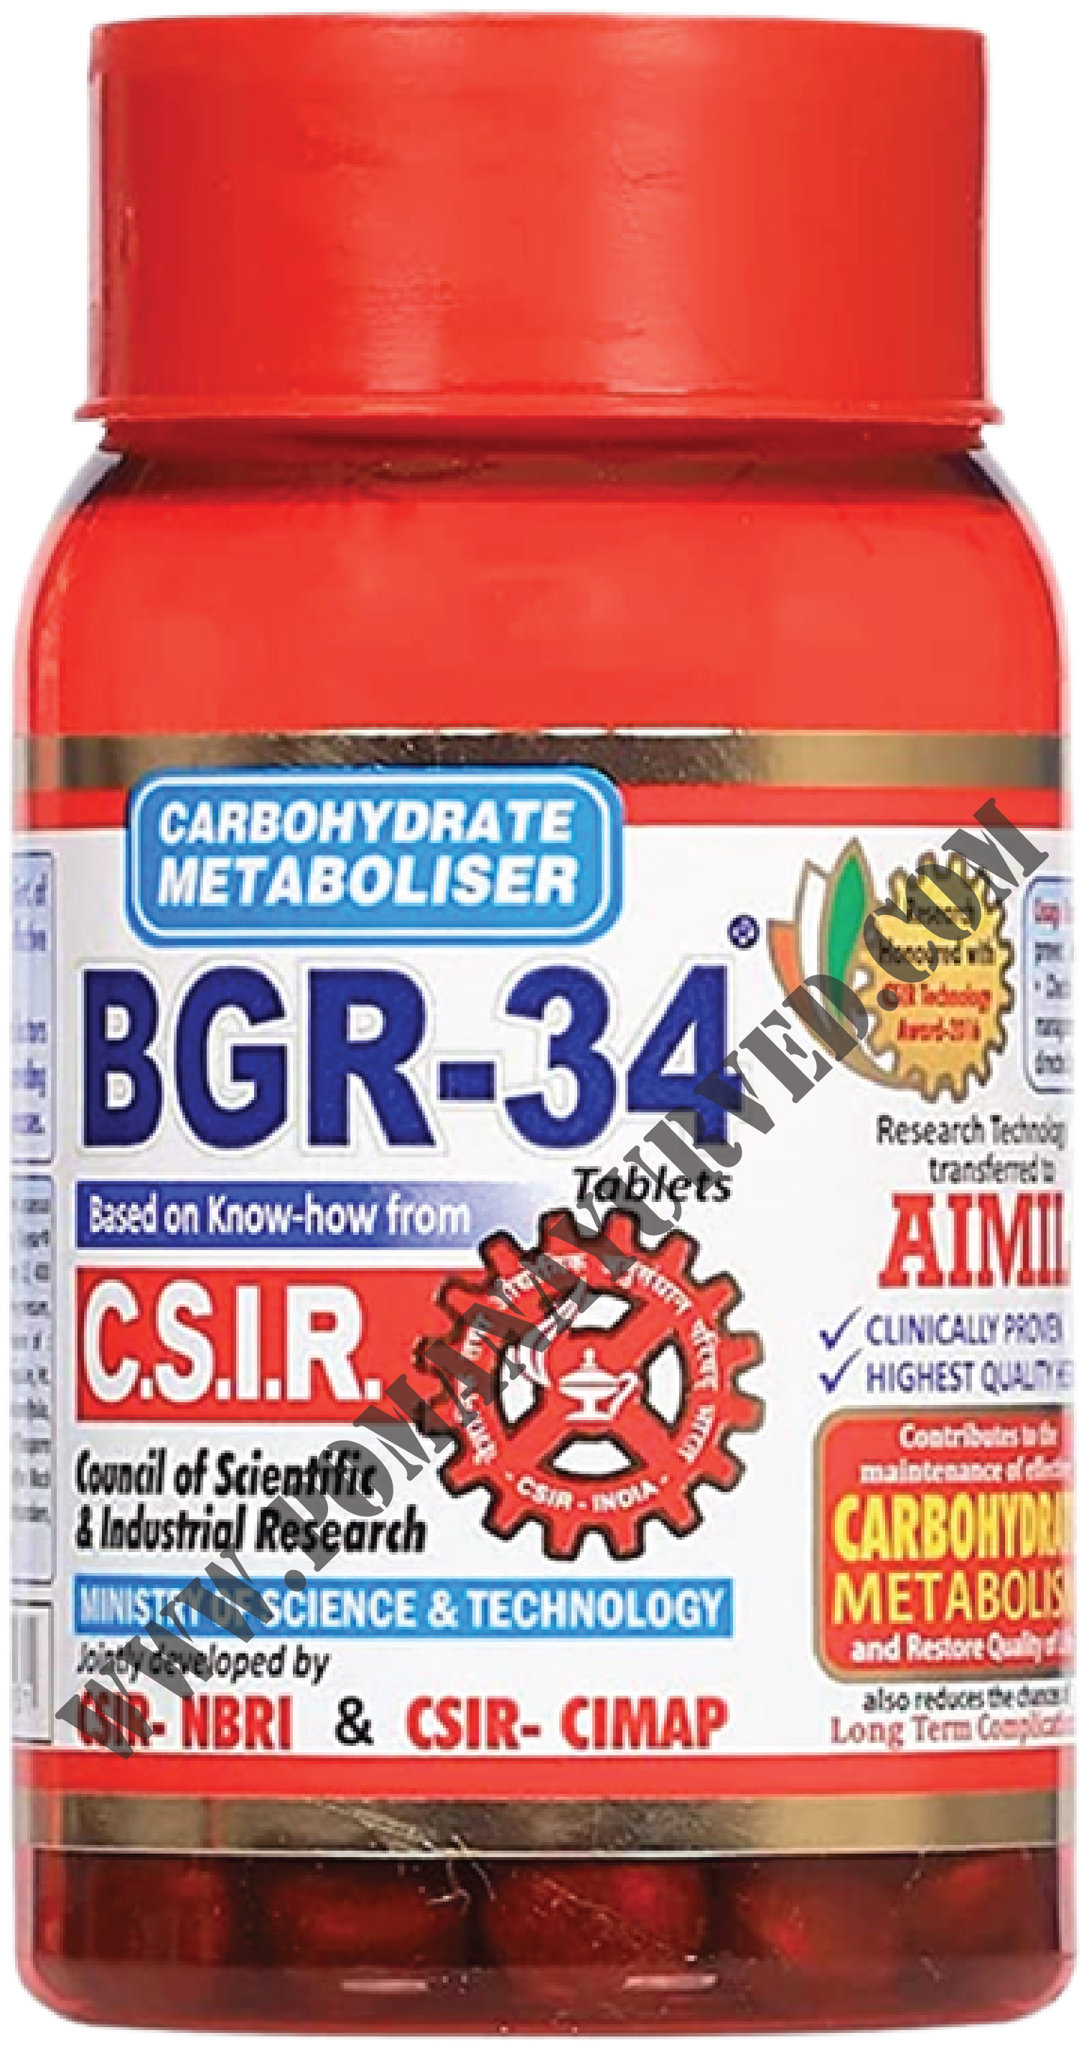 Picture of BGR 34 Tablets